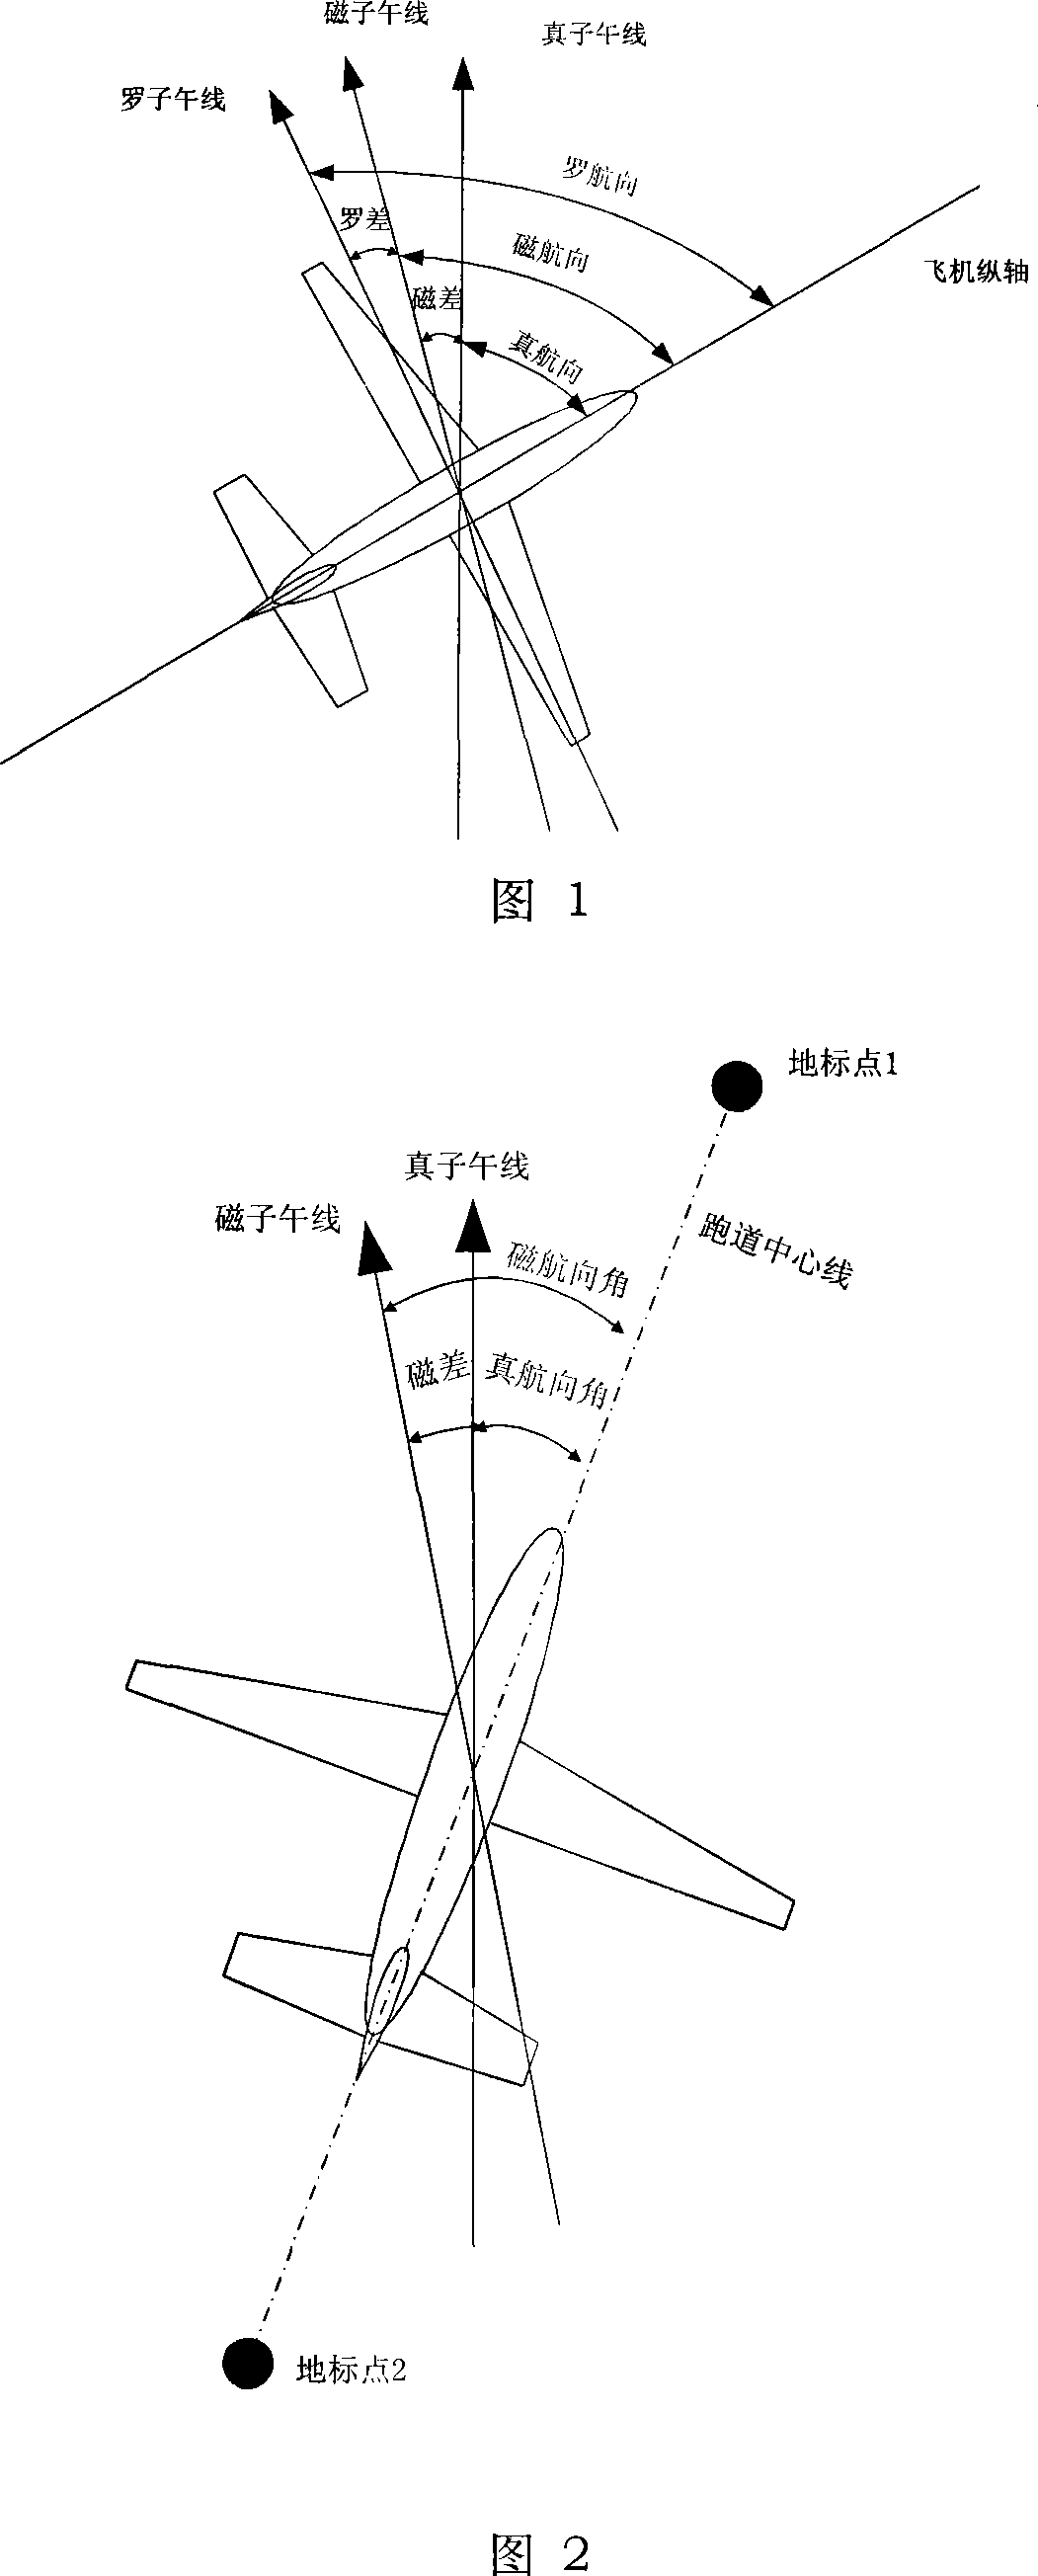 Method for self-correcting course of depopulated vehicle based on magnetic course sensor